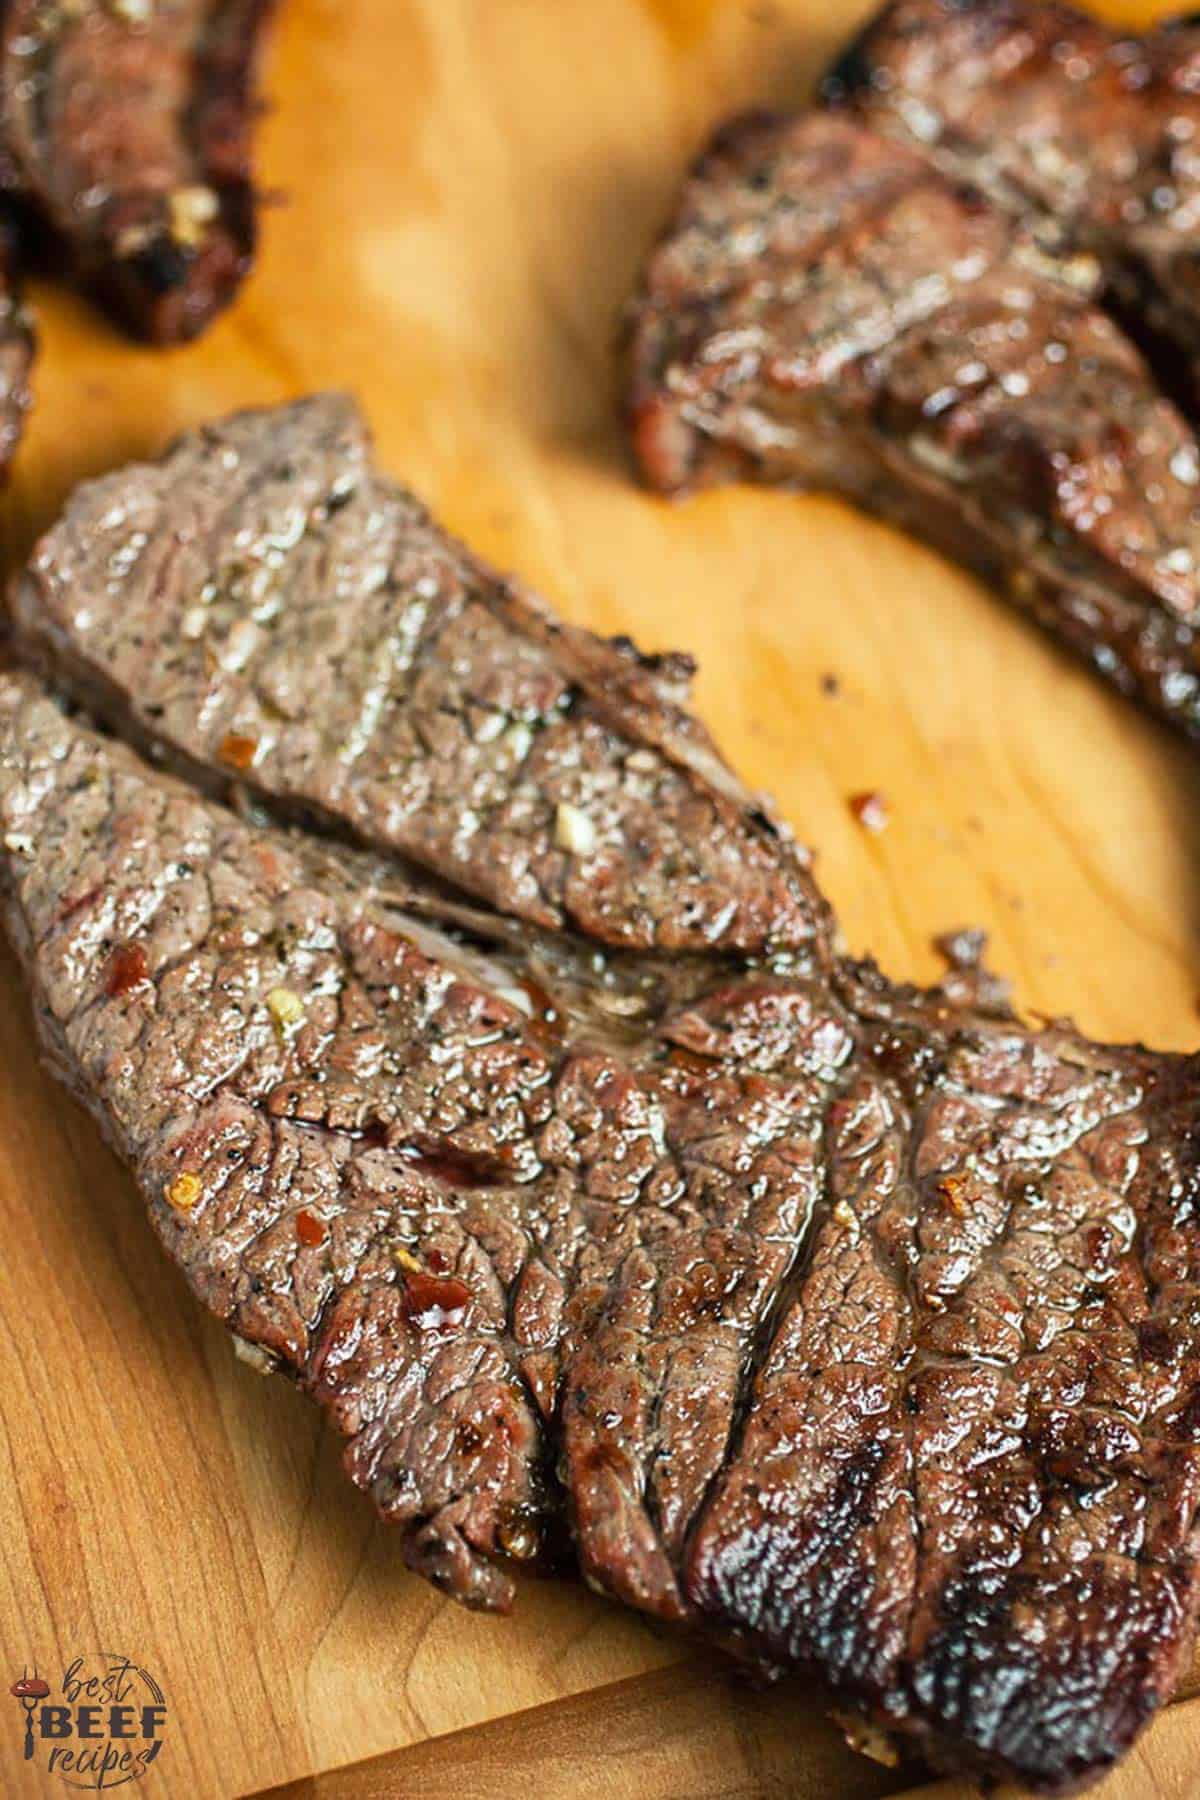 Grilled Chuck Steak Recipe With Compound Butter Best Beef Recipes